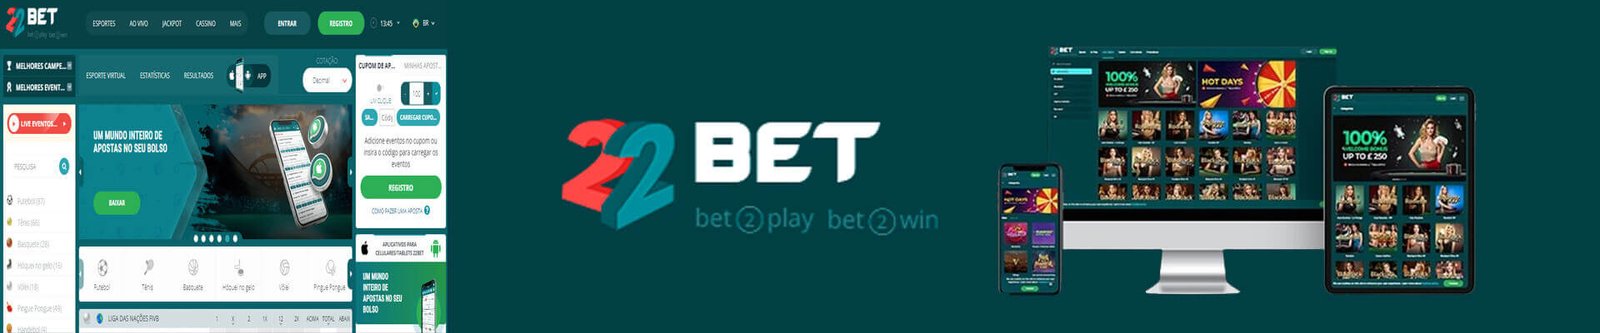 Registration Guide For Exclusive Benefits At 22Bet Casino